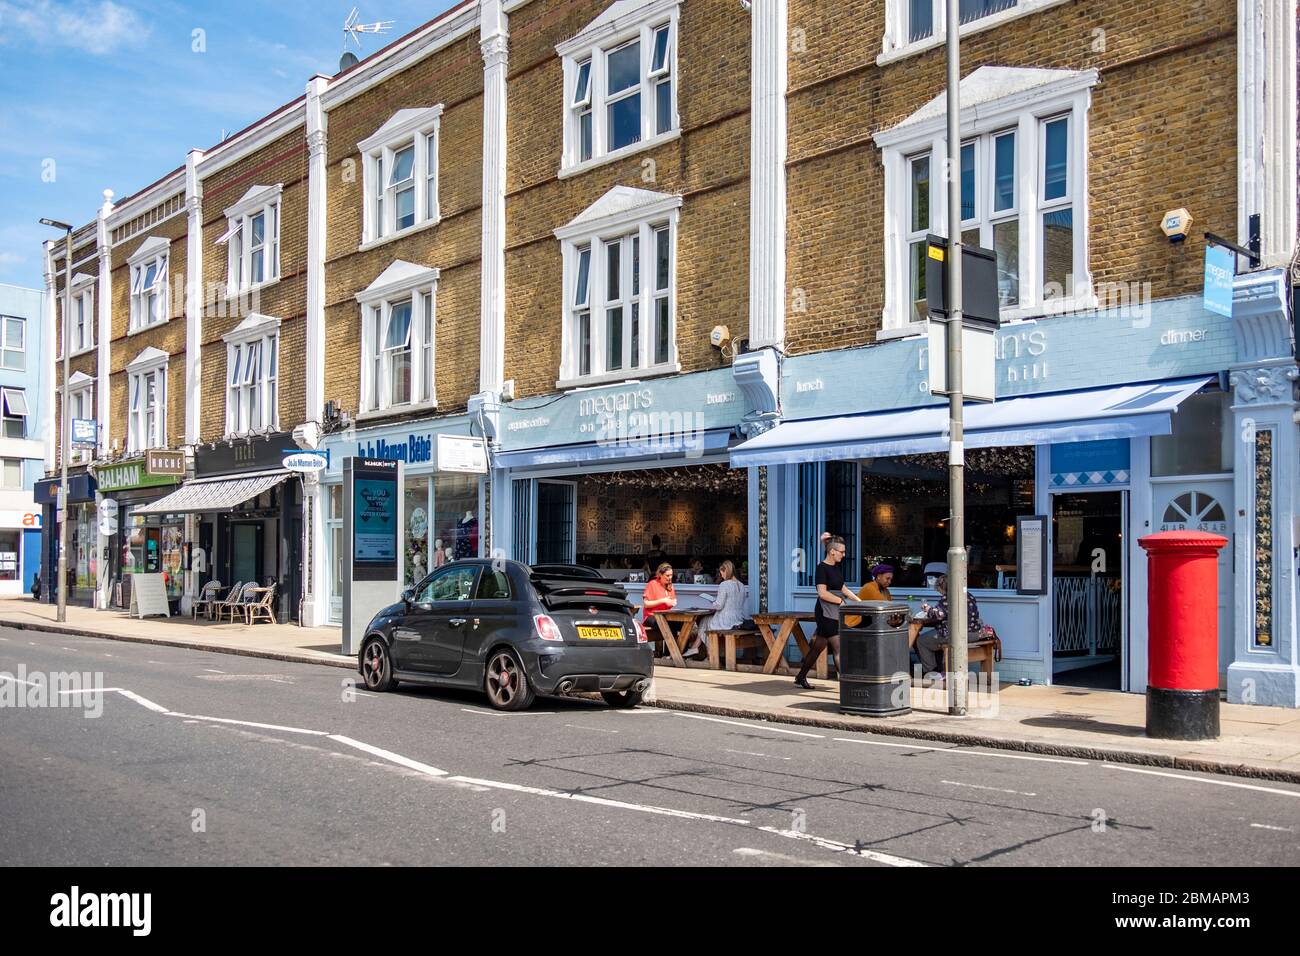 LONDON- High street shopping scene in Balham, an area of south west London Stock Photo